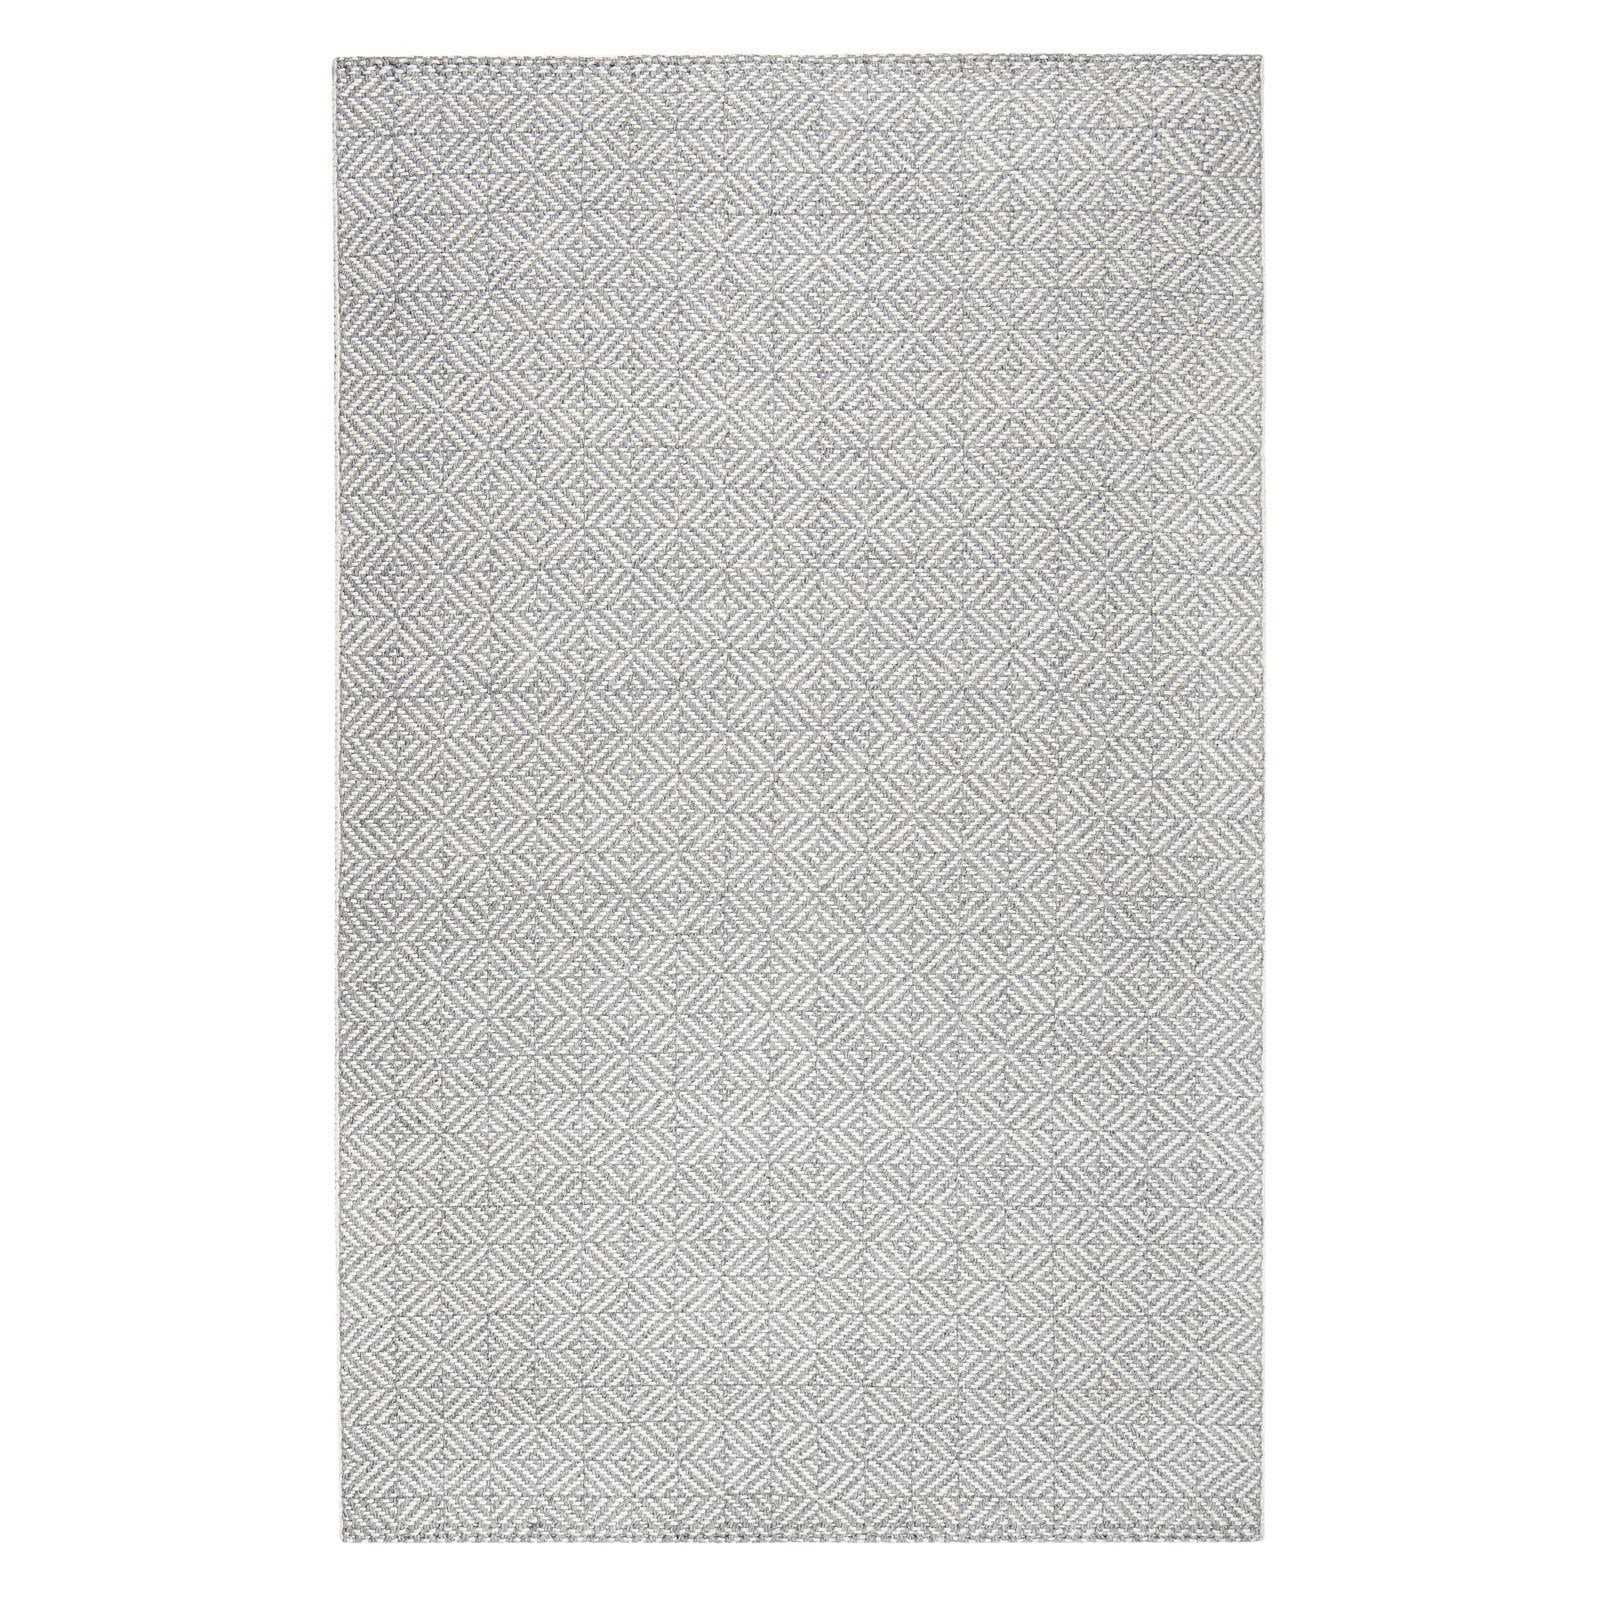 Picture of Anji Mountain AMB0411-0058 5 x 8 ft. Inanna Flatweave Neutral Rug - Gray & White